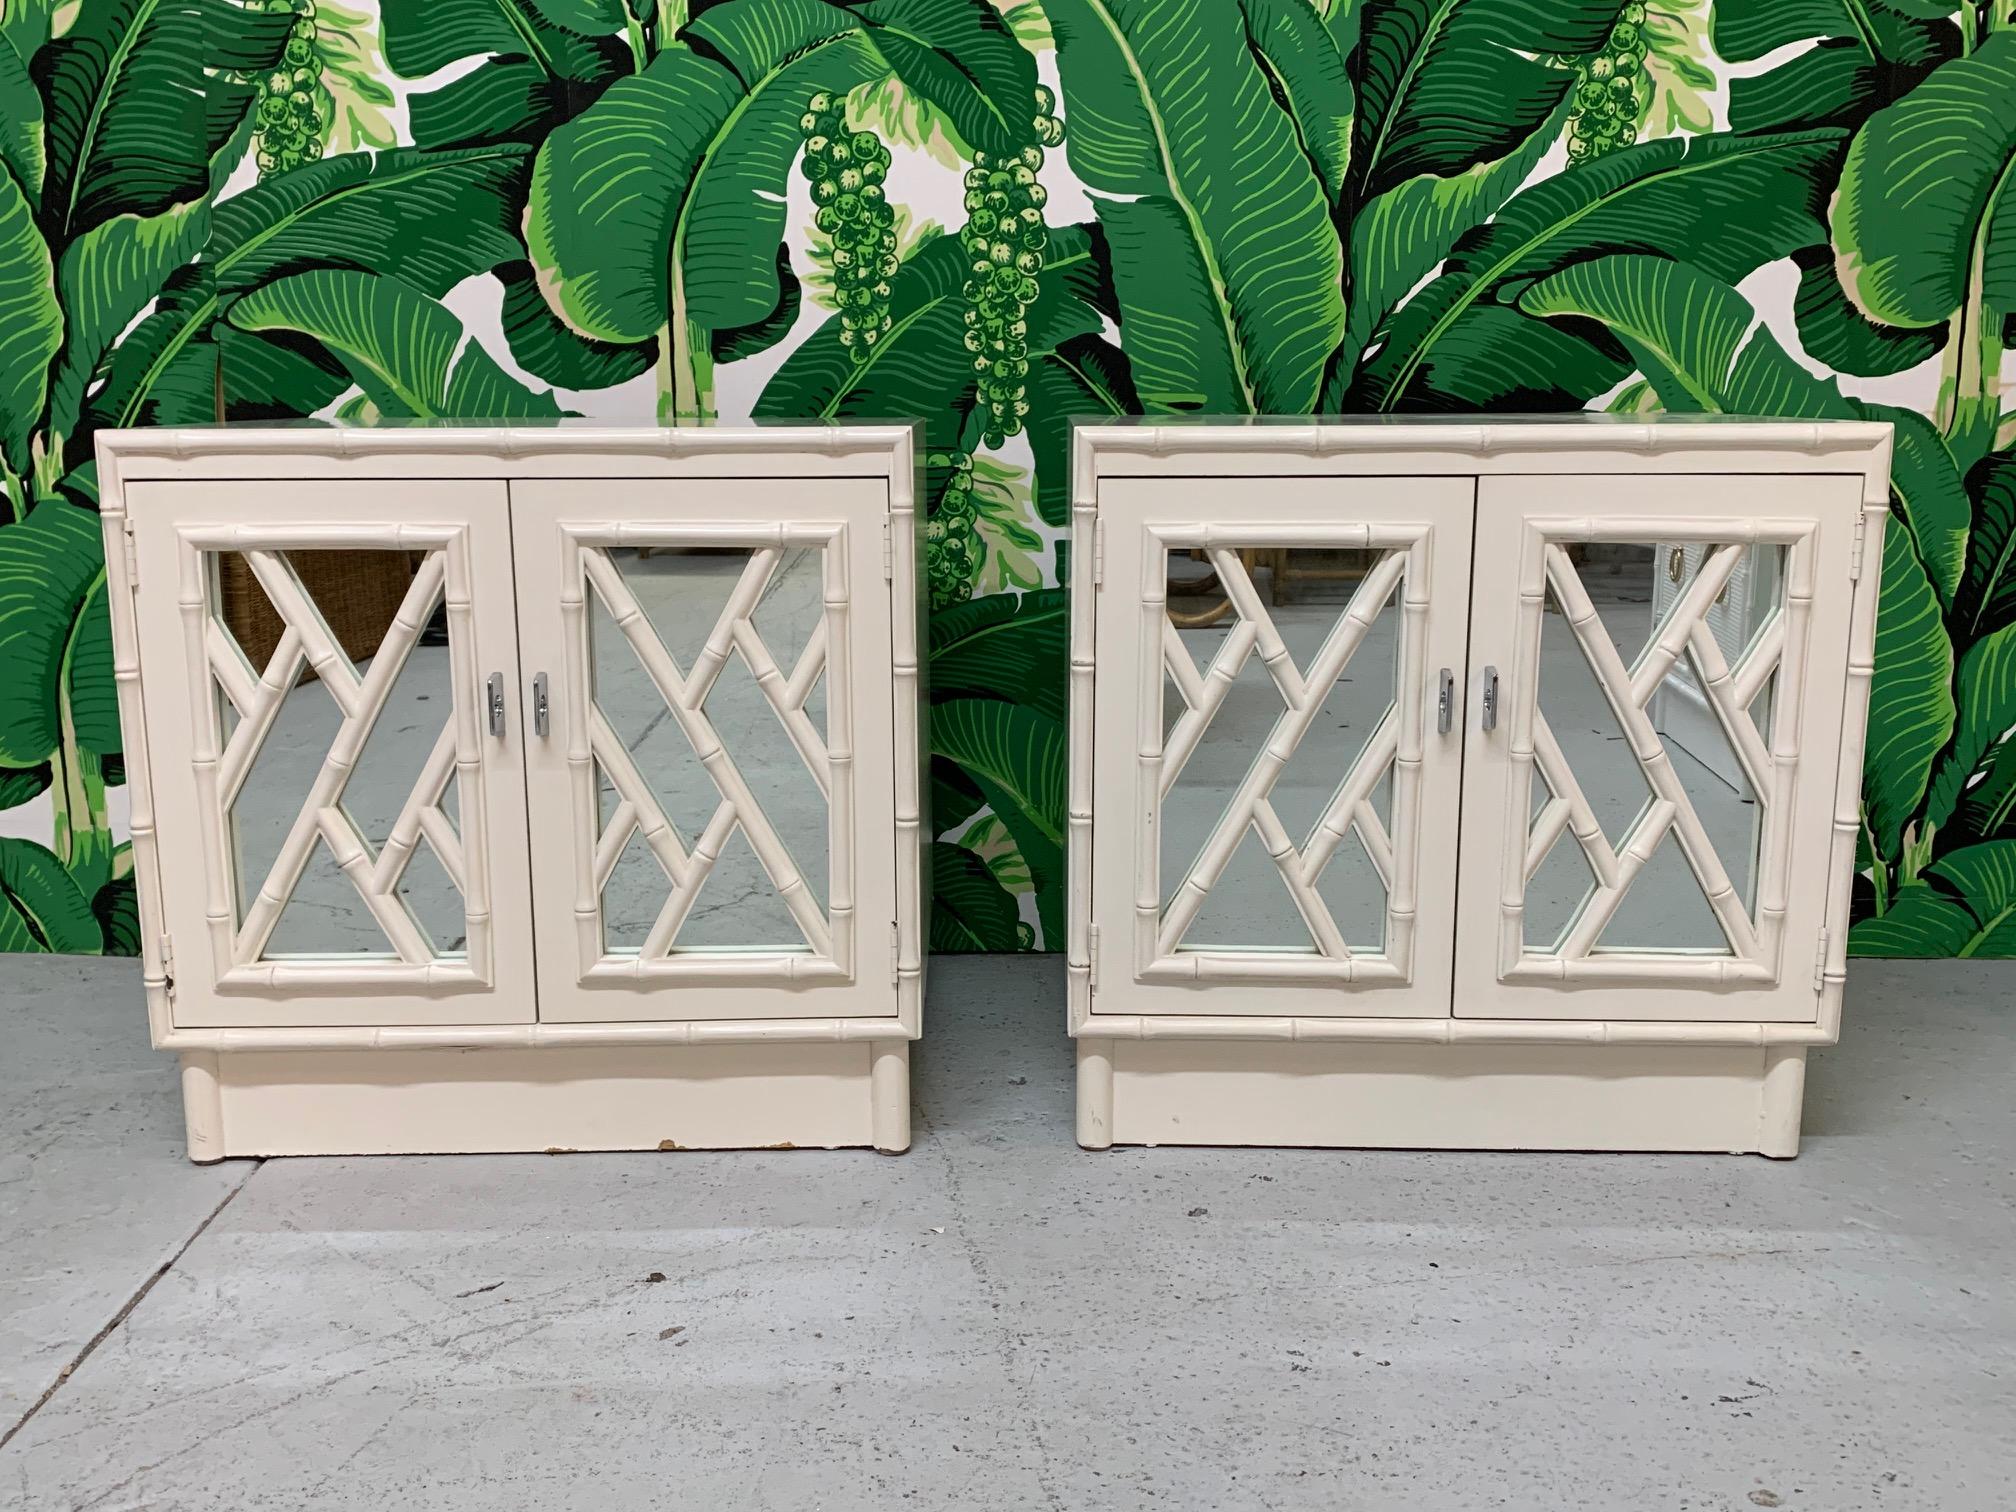 Pair of Hollywood Regency style nightstands feature chinoiserie pattern detailing over mirrored doors. Good condition with minor imperfections consistent with age.